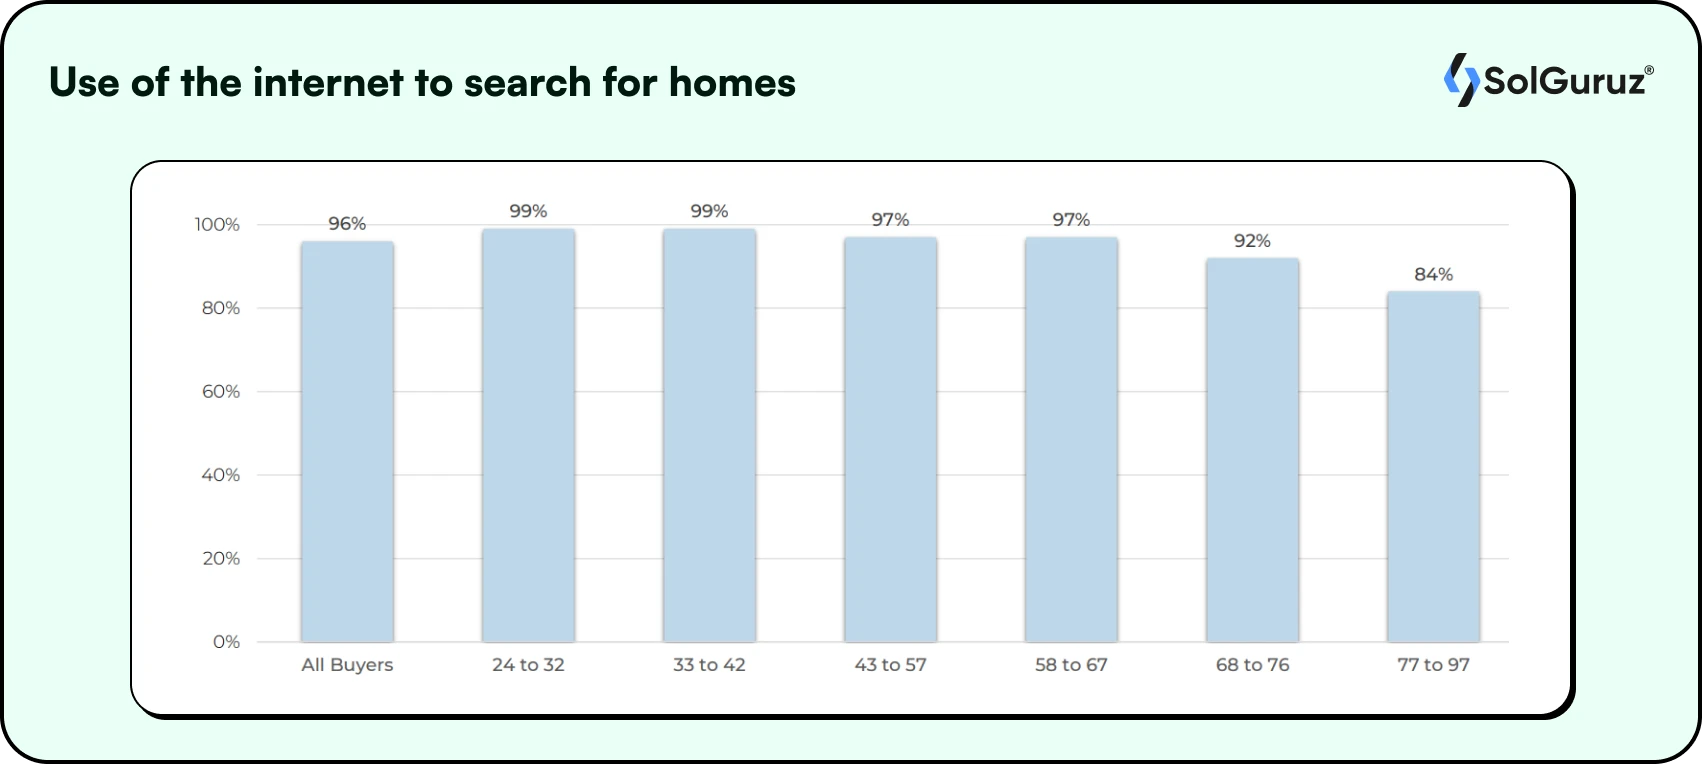 Use of the internet to search for homes